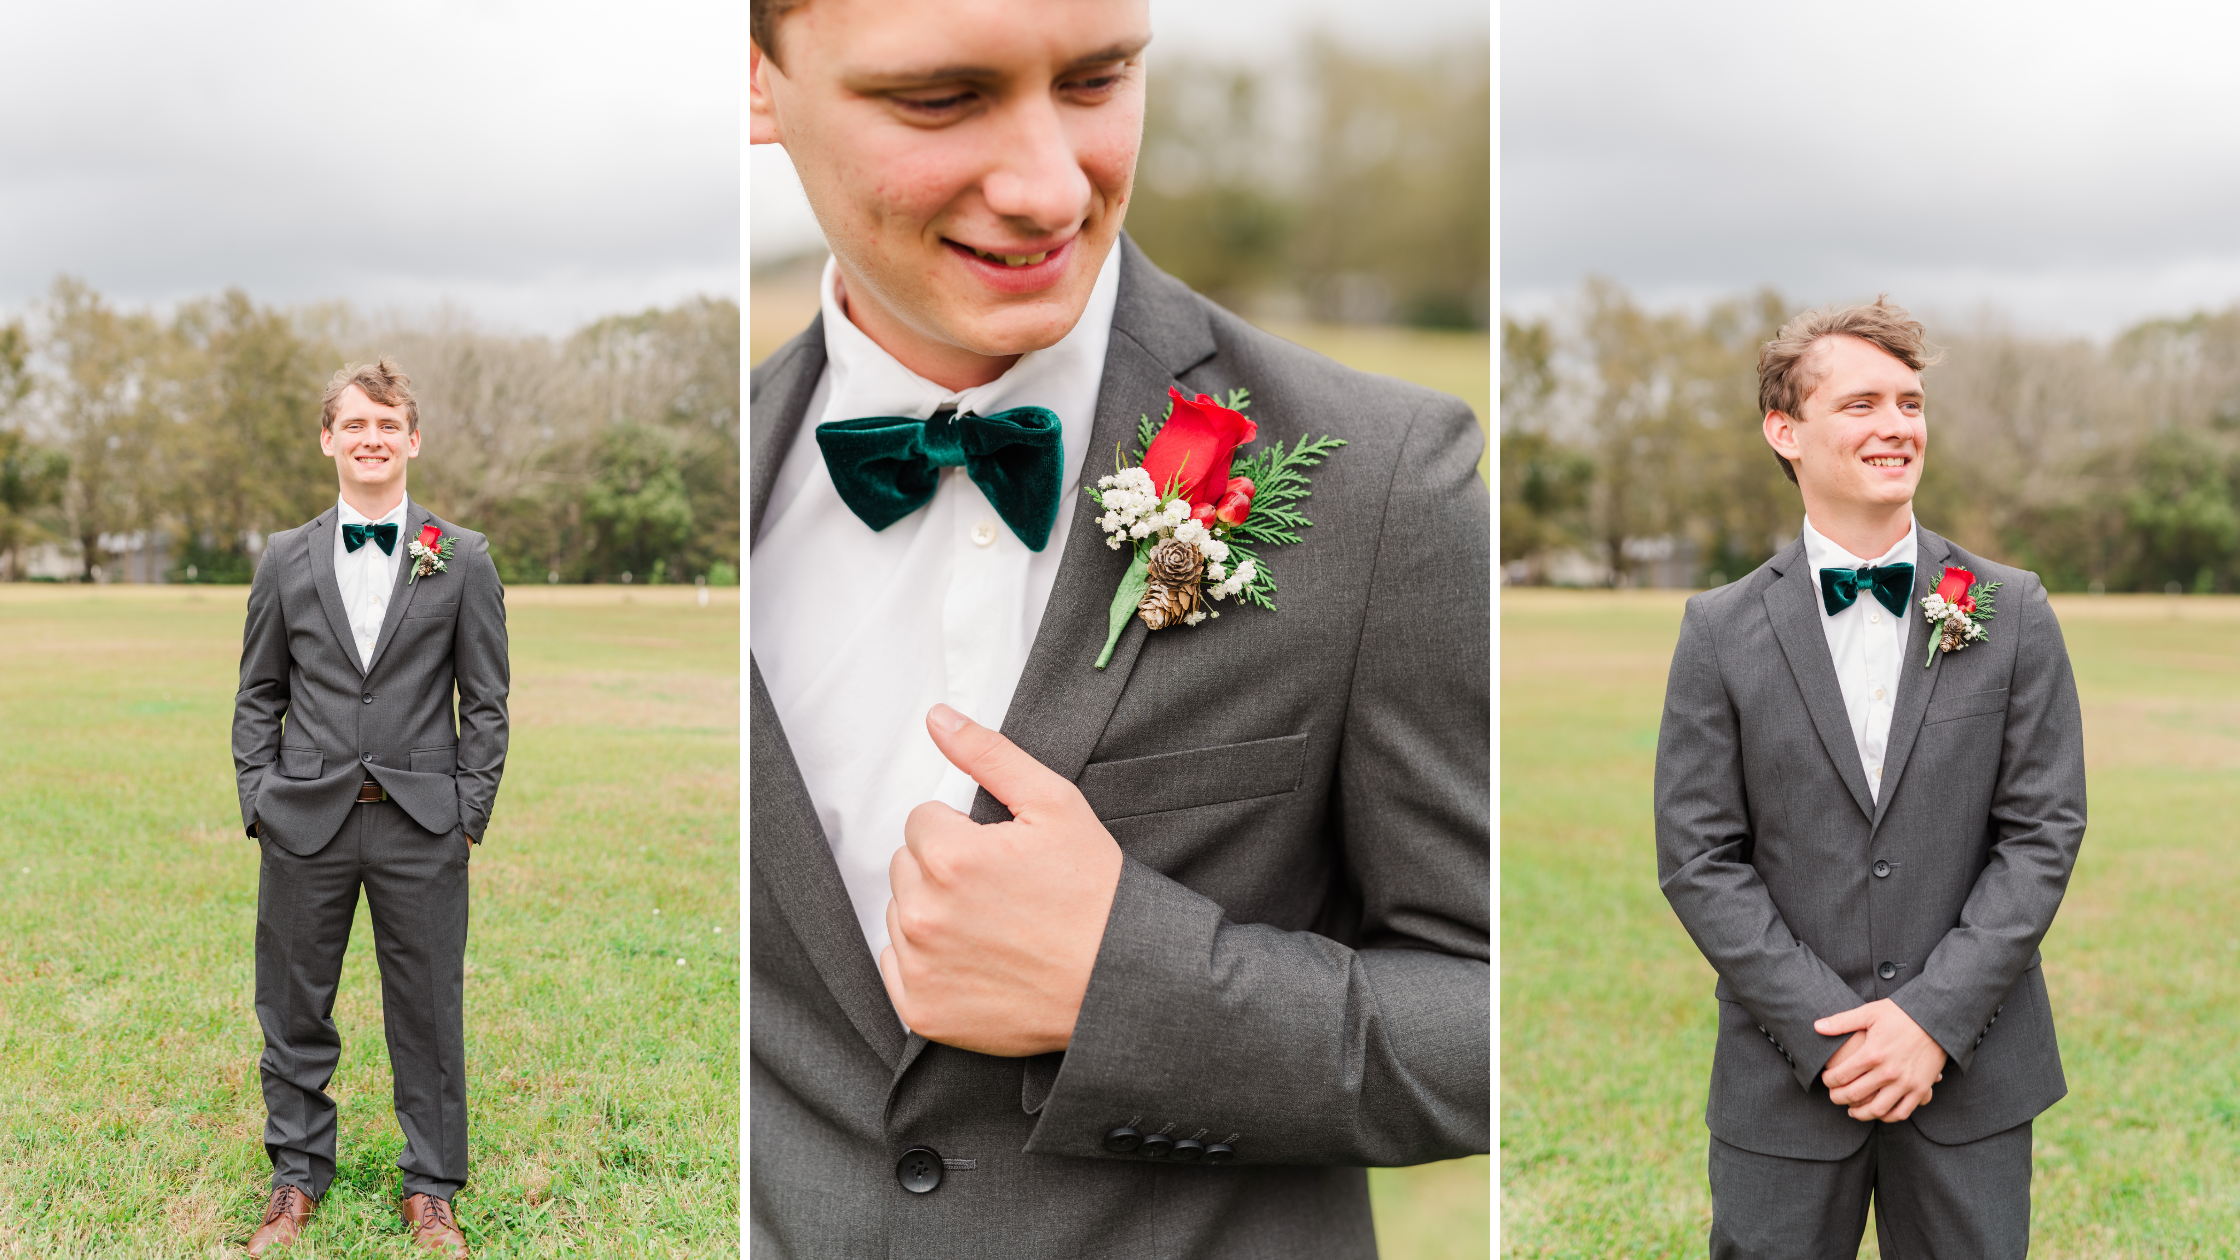 Church and Barn Wedding in Robertsdale Alabama Photographed by Kristen Marcus Photography